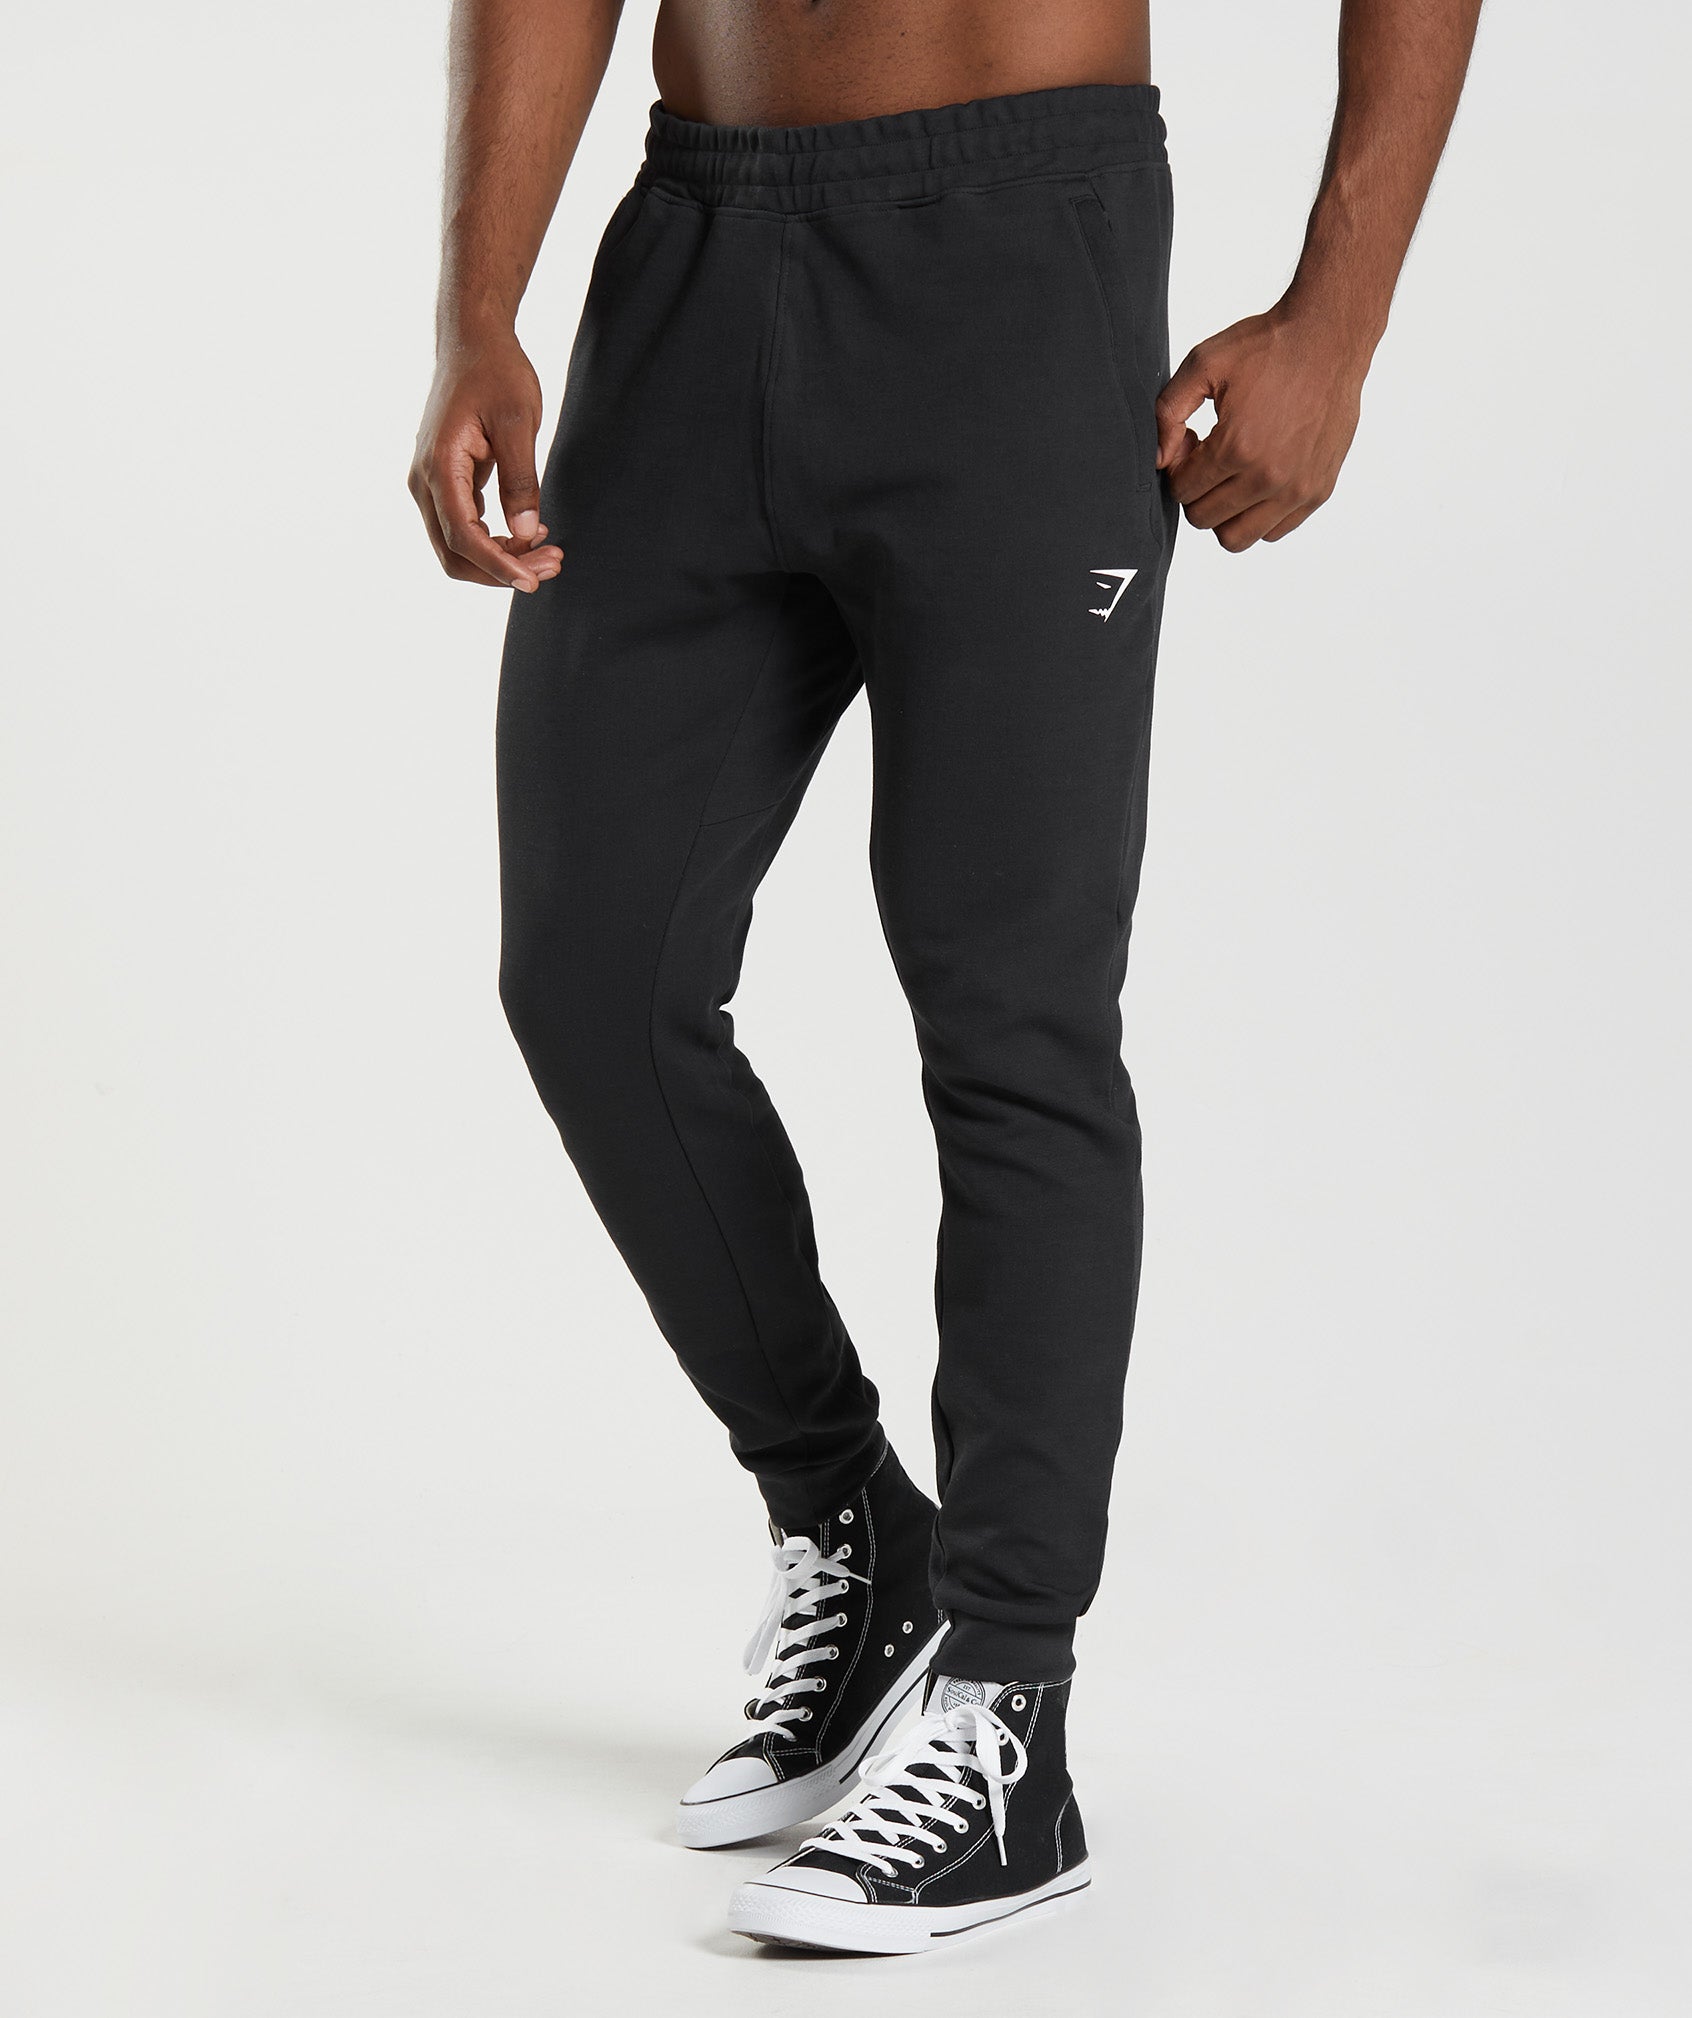 Joggers & Sweatpants - Gymshark Products For Sale - Mcvallescrivia